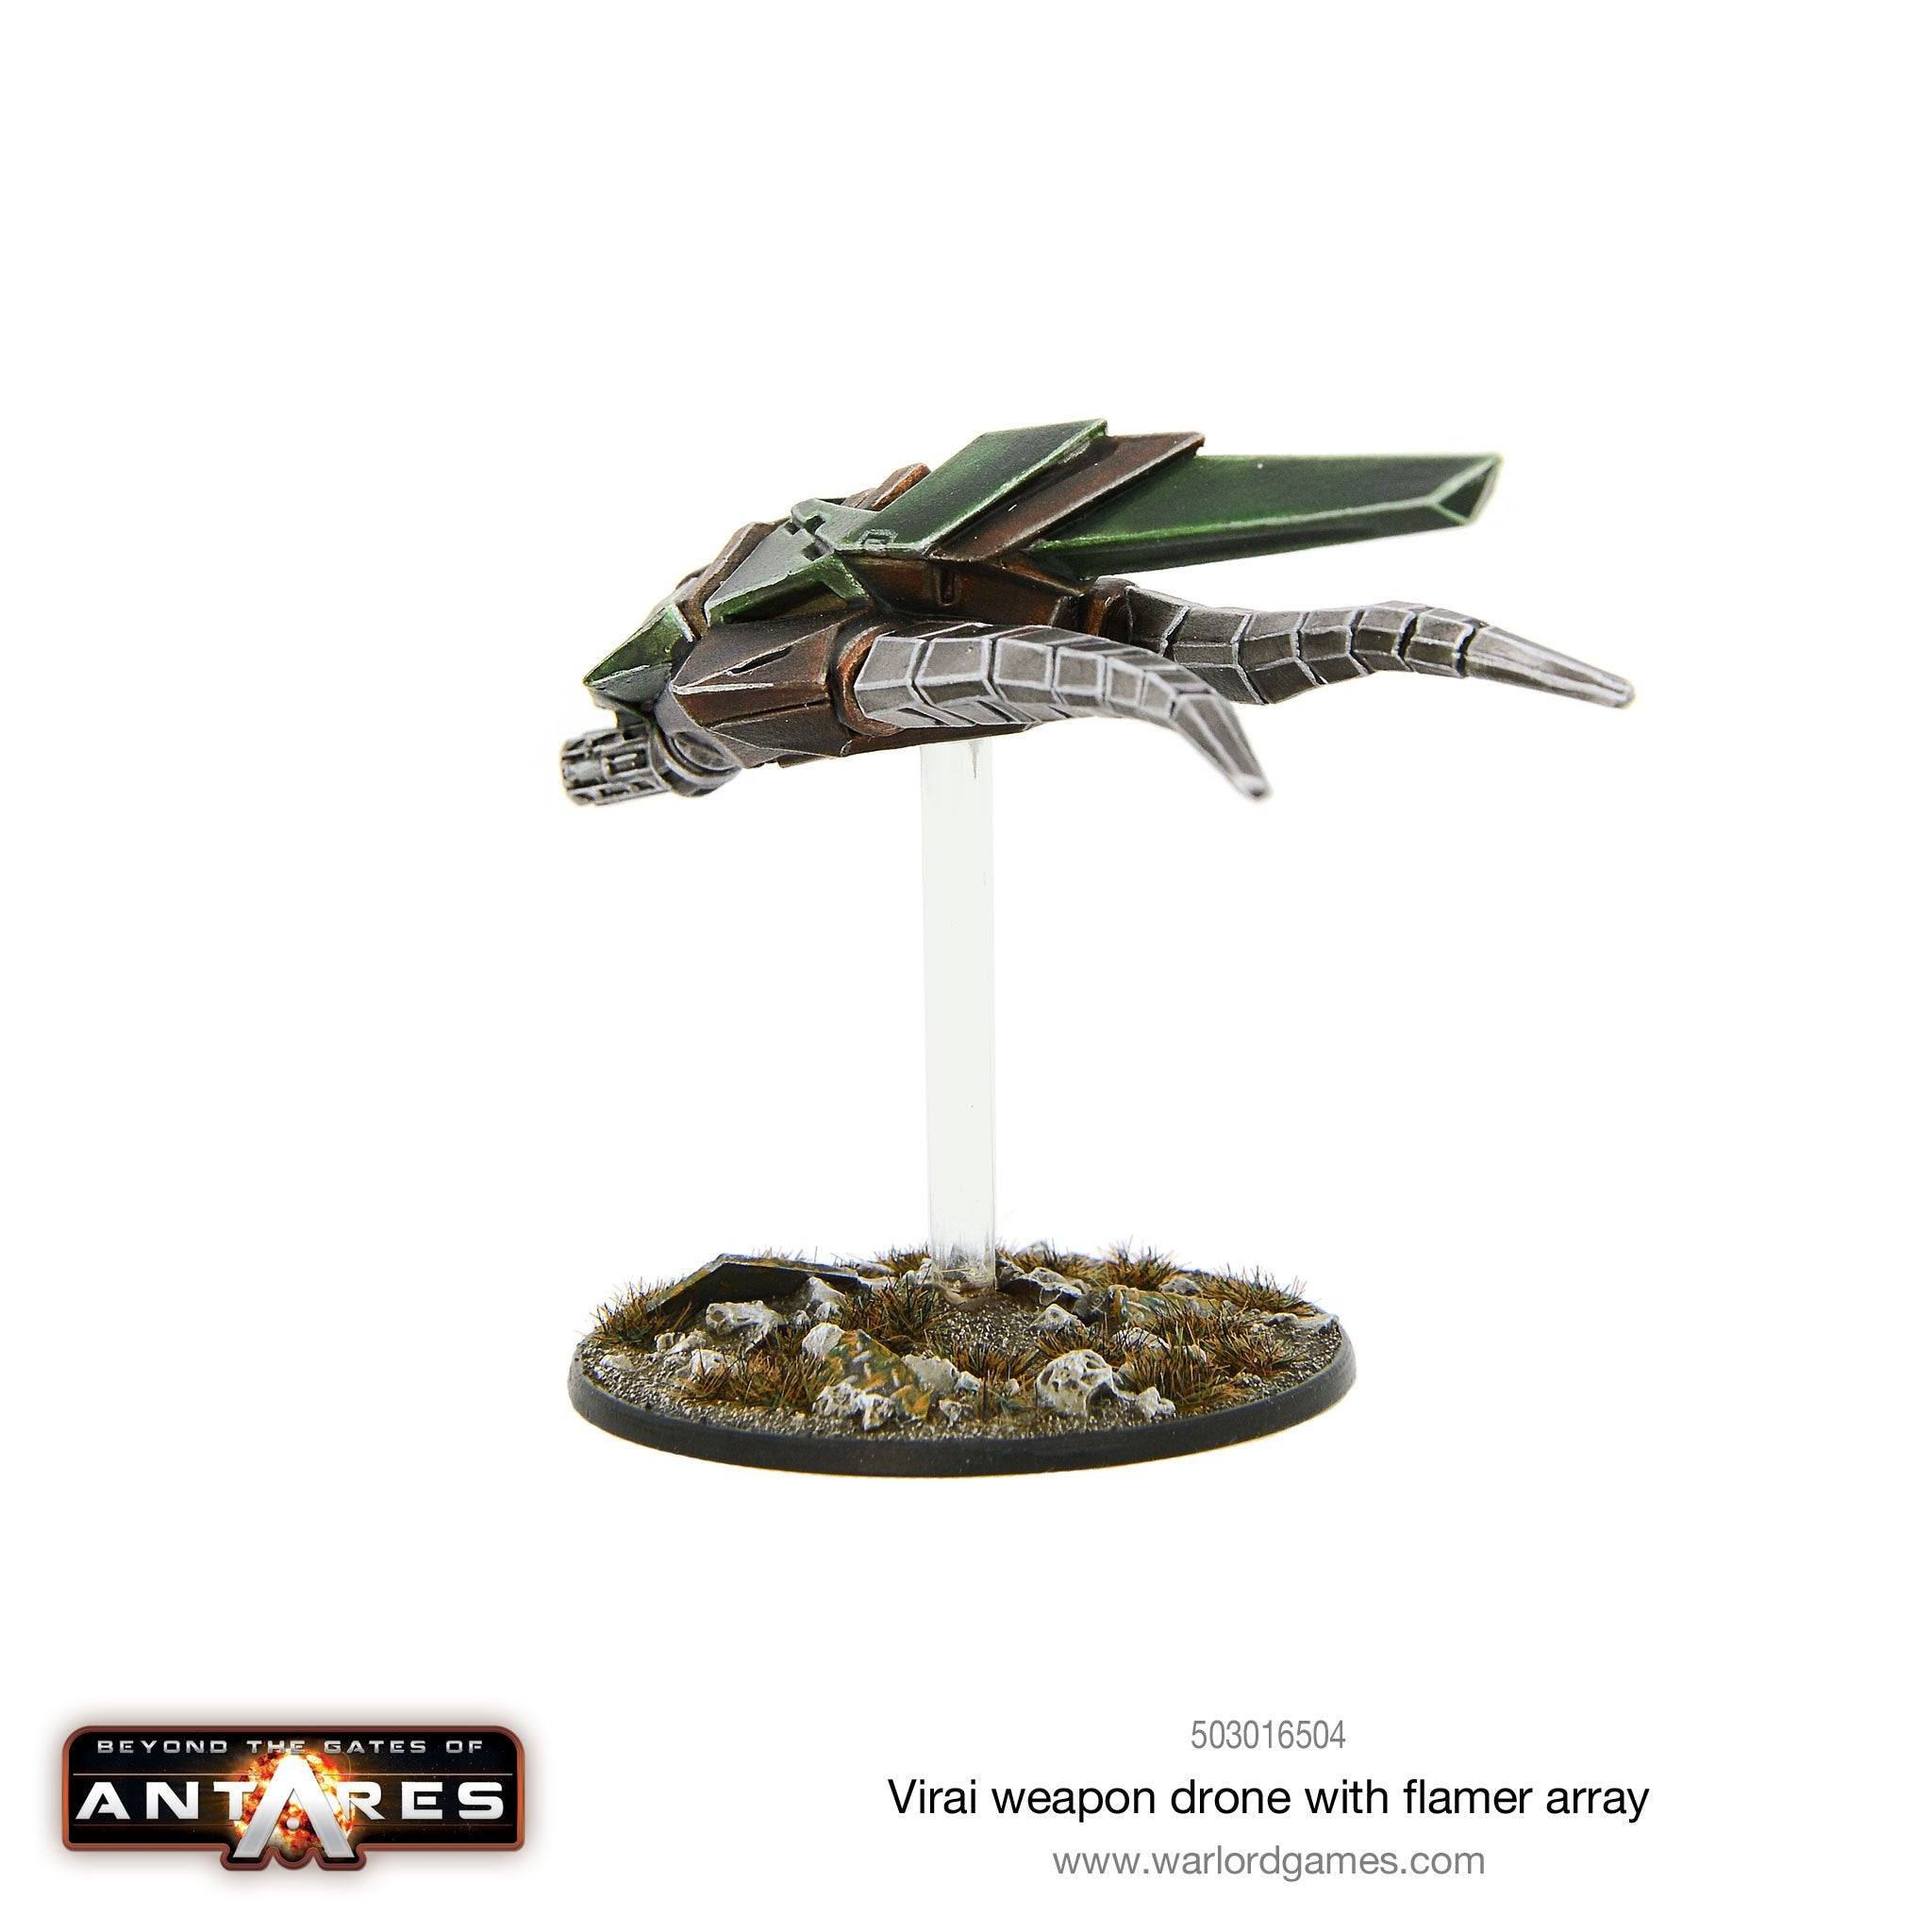 Virai Dronescourge weapon drone with flamer array